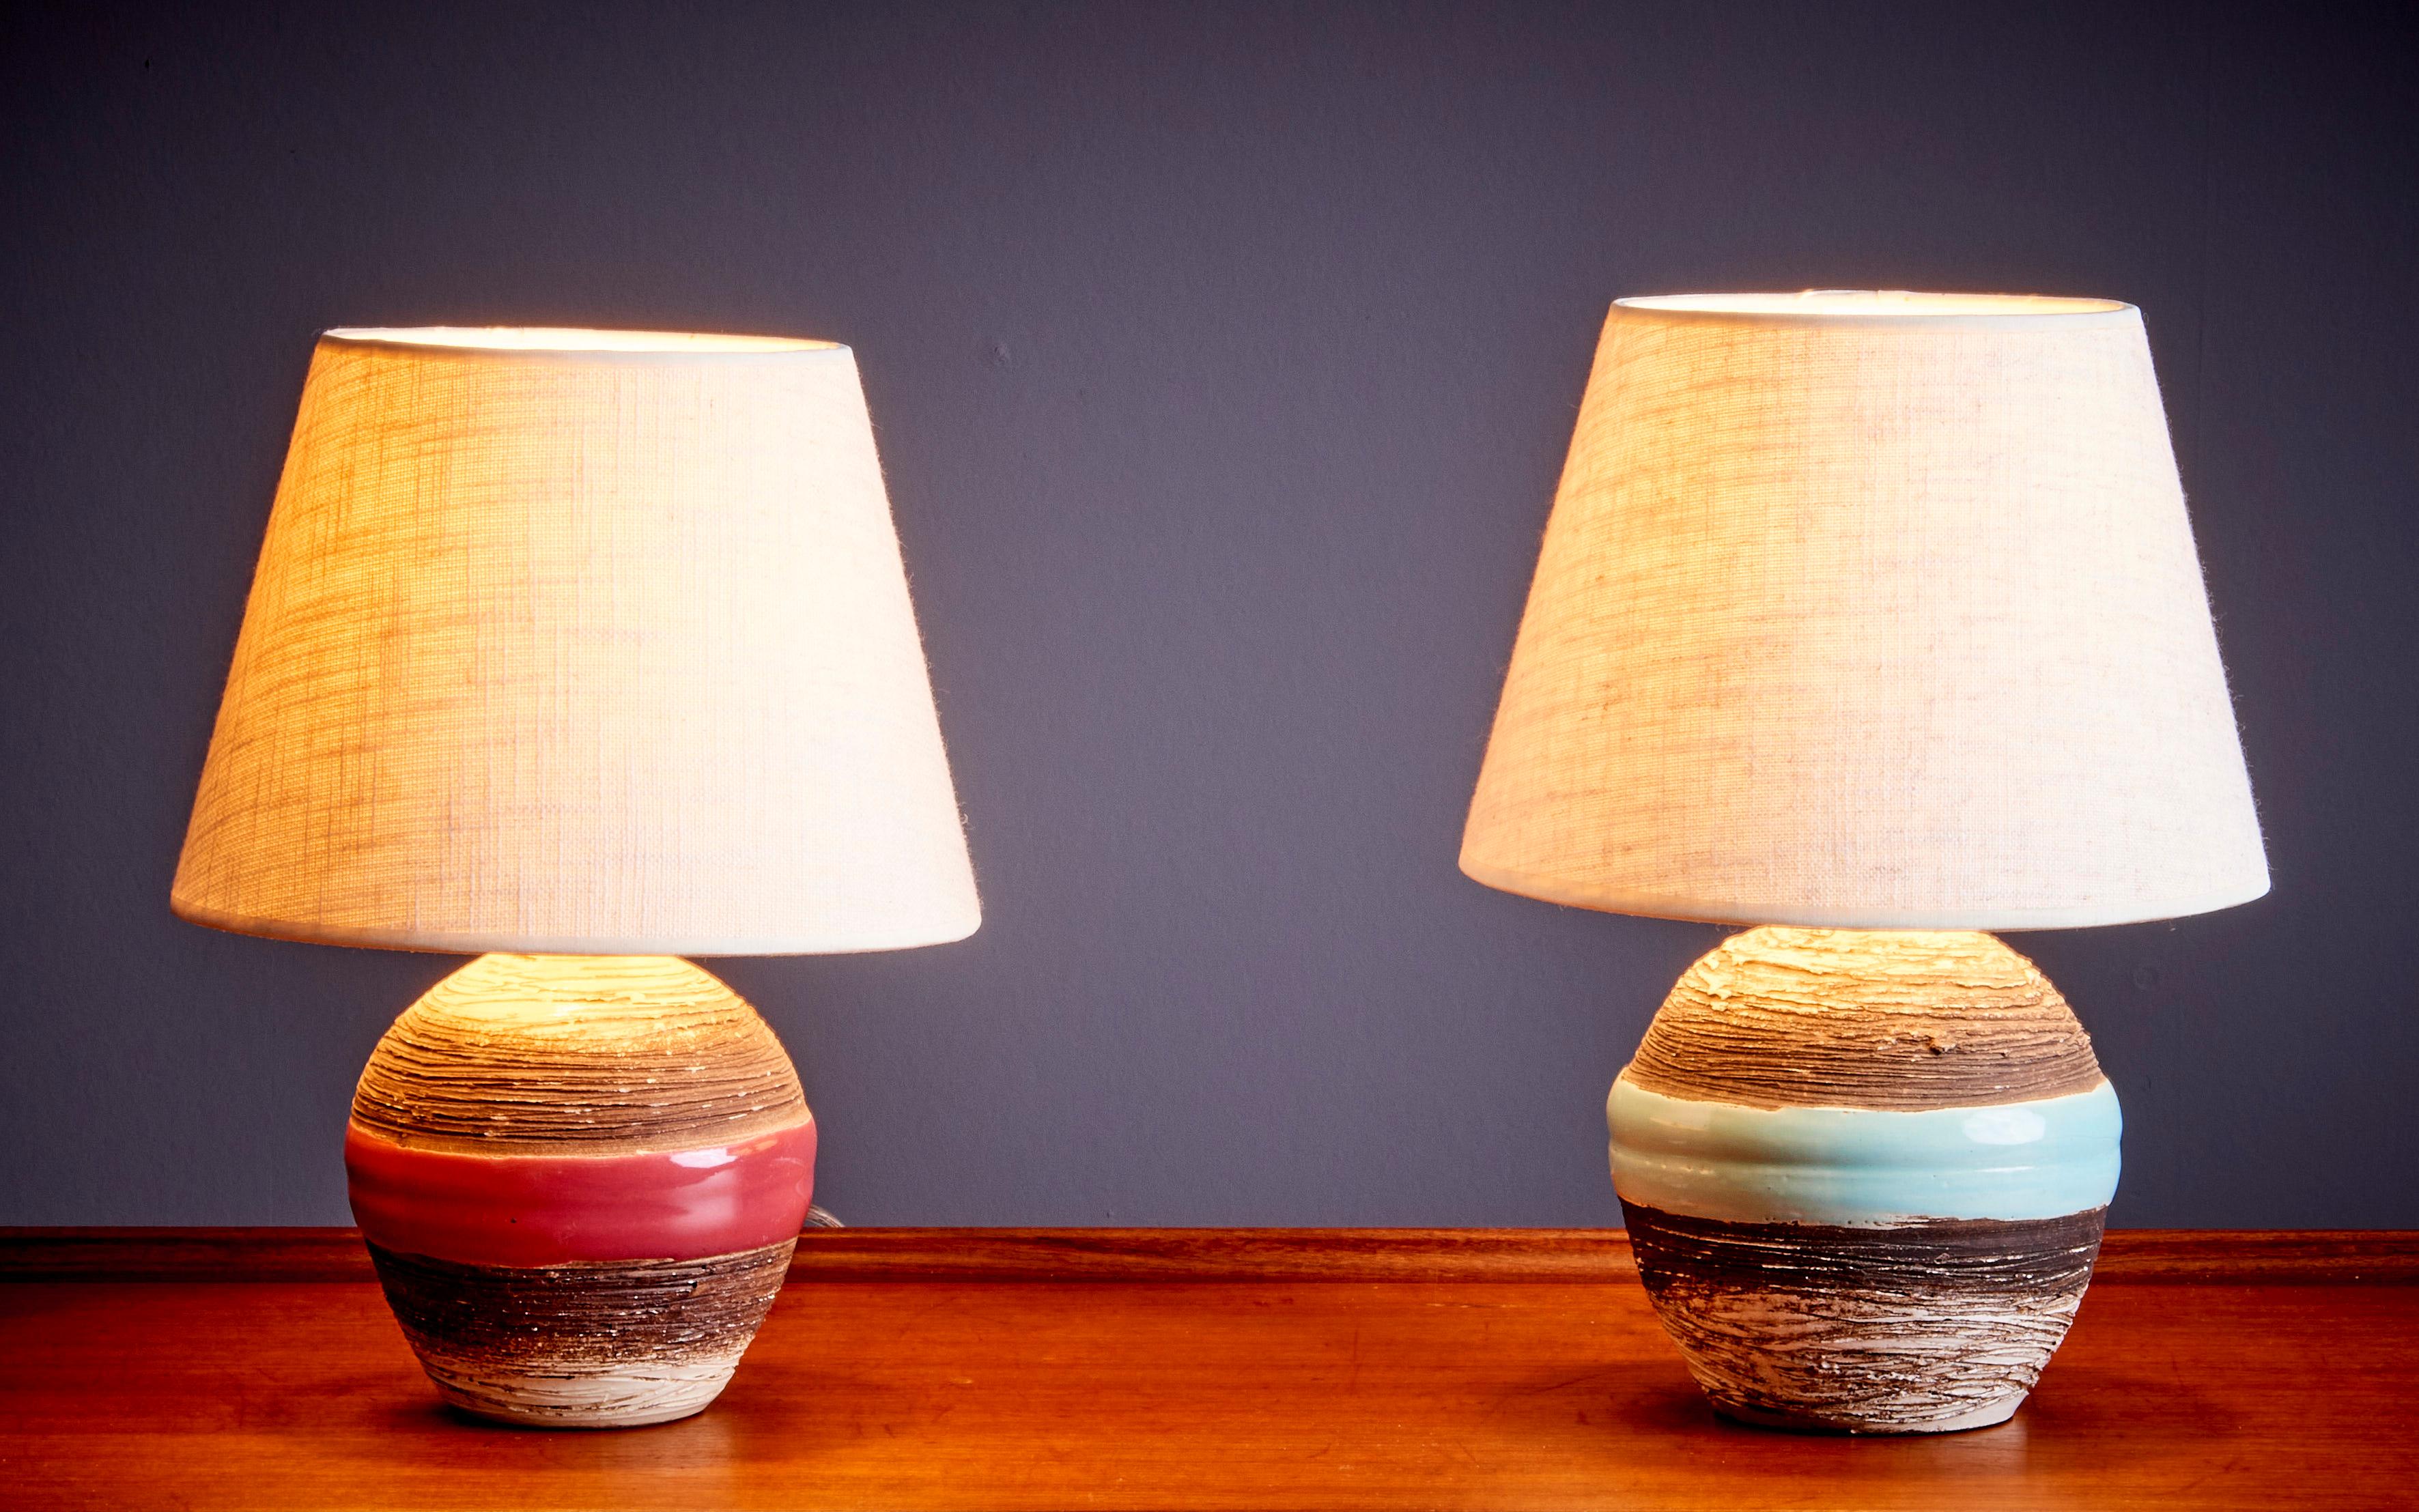 Keramos Table Lamps with no chips in excellent condition. Very beautiful Art Deco pieces.
To be on the safe side, the lamp should be checked locally by a specialist concerning local requirements.

